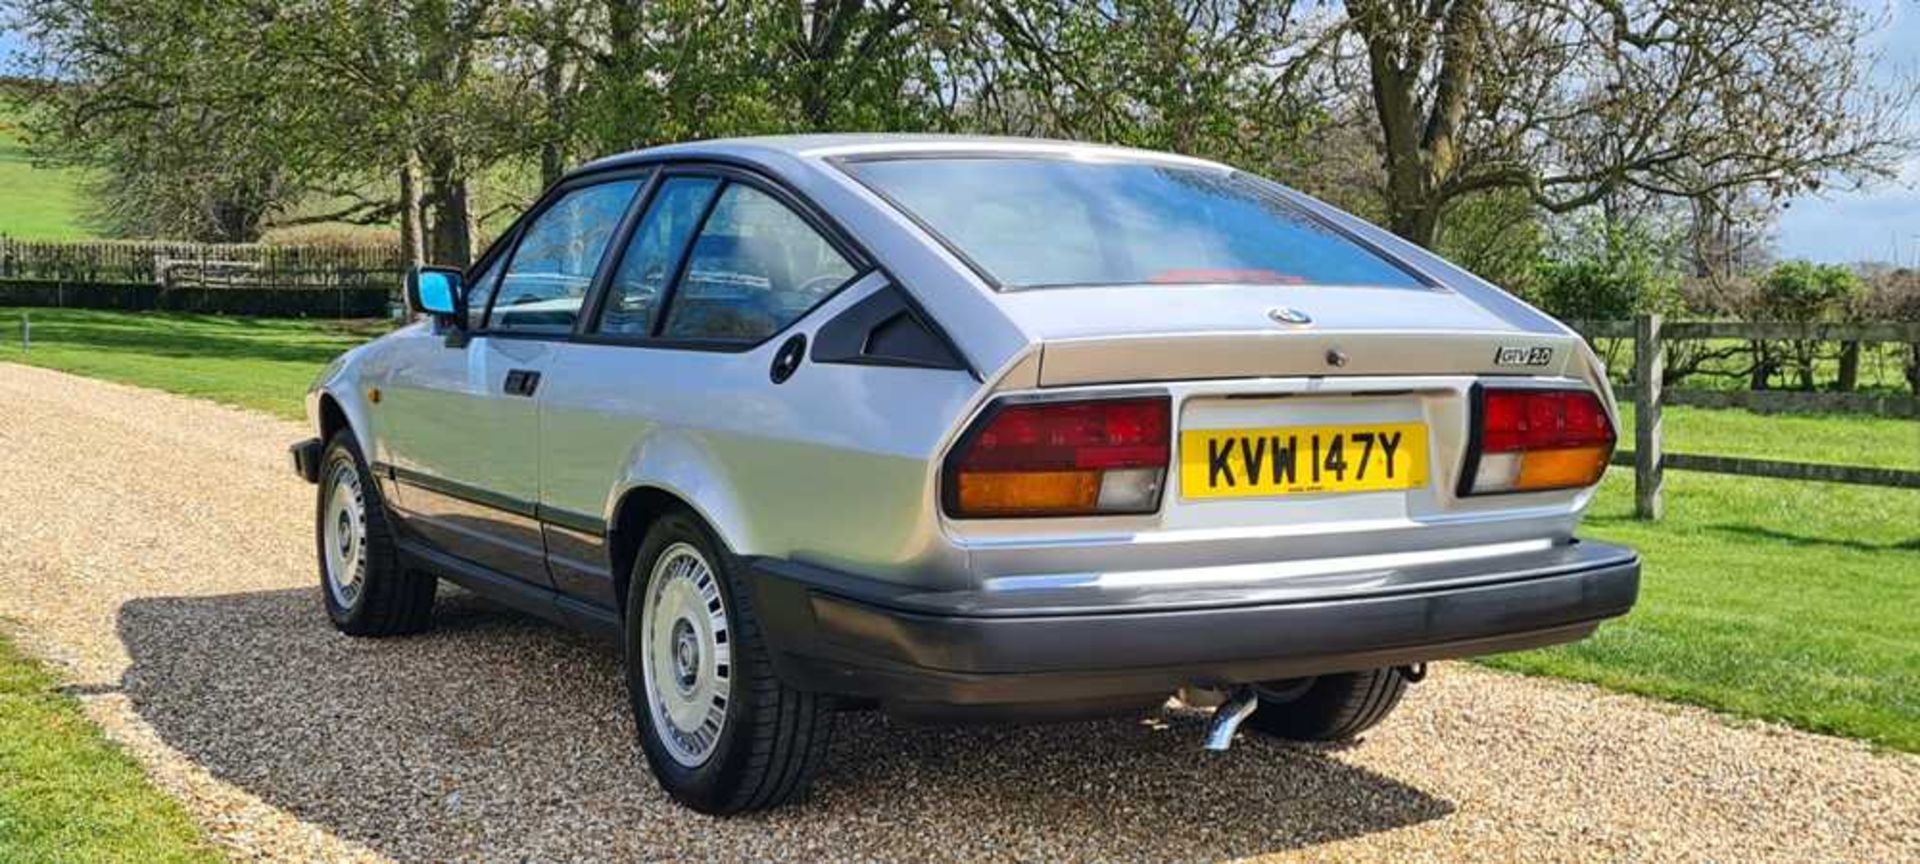 1983 Alfa Romeo GTV 2.0 litre Single family ownership and 48,000 miles from new - Image 22 of 51